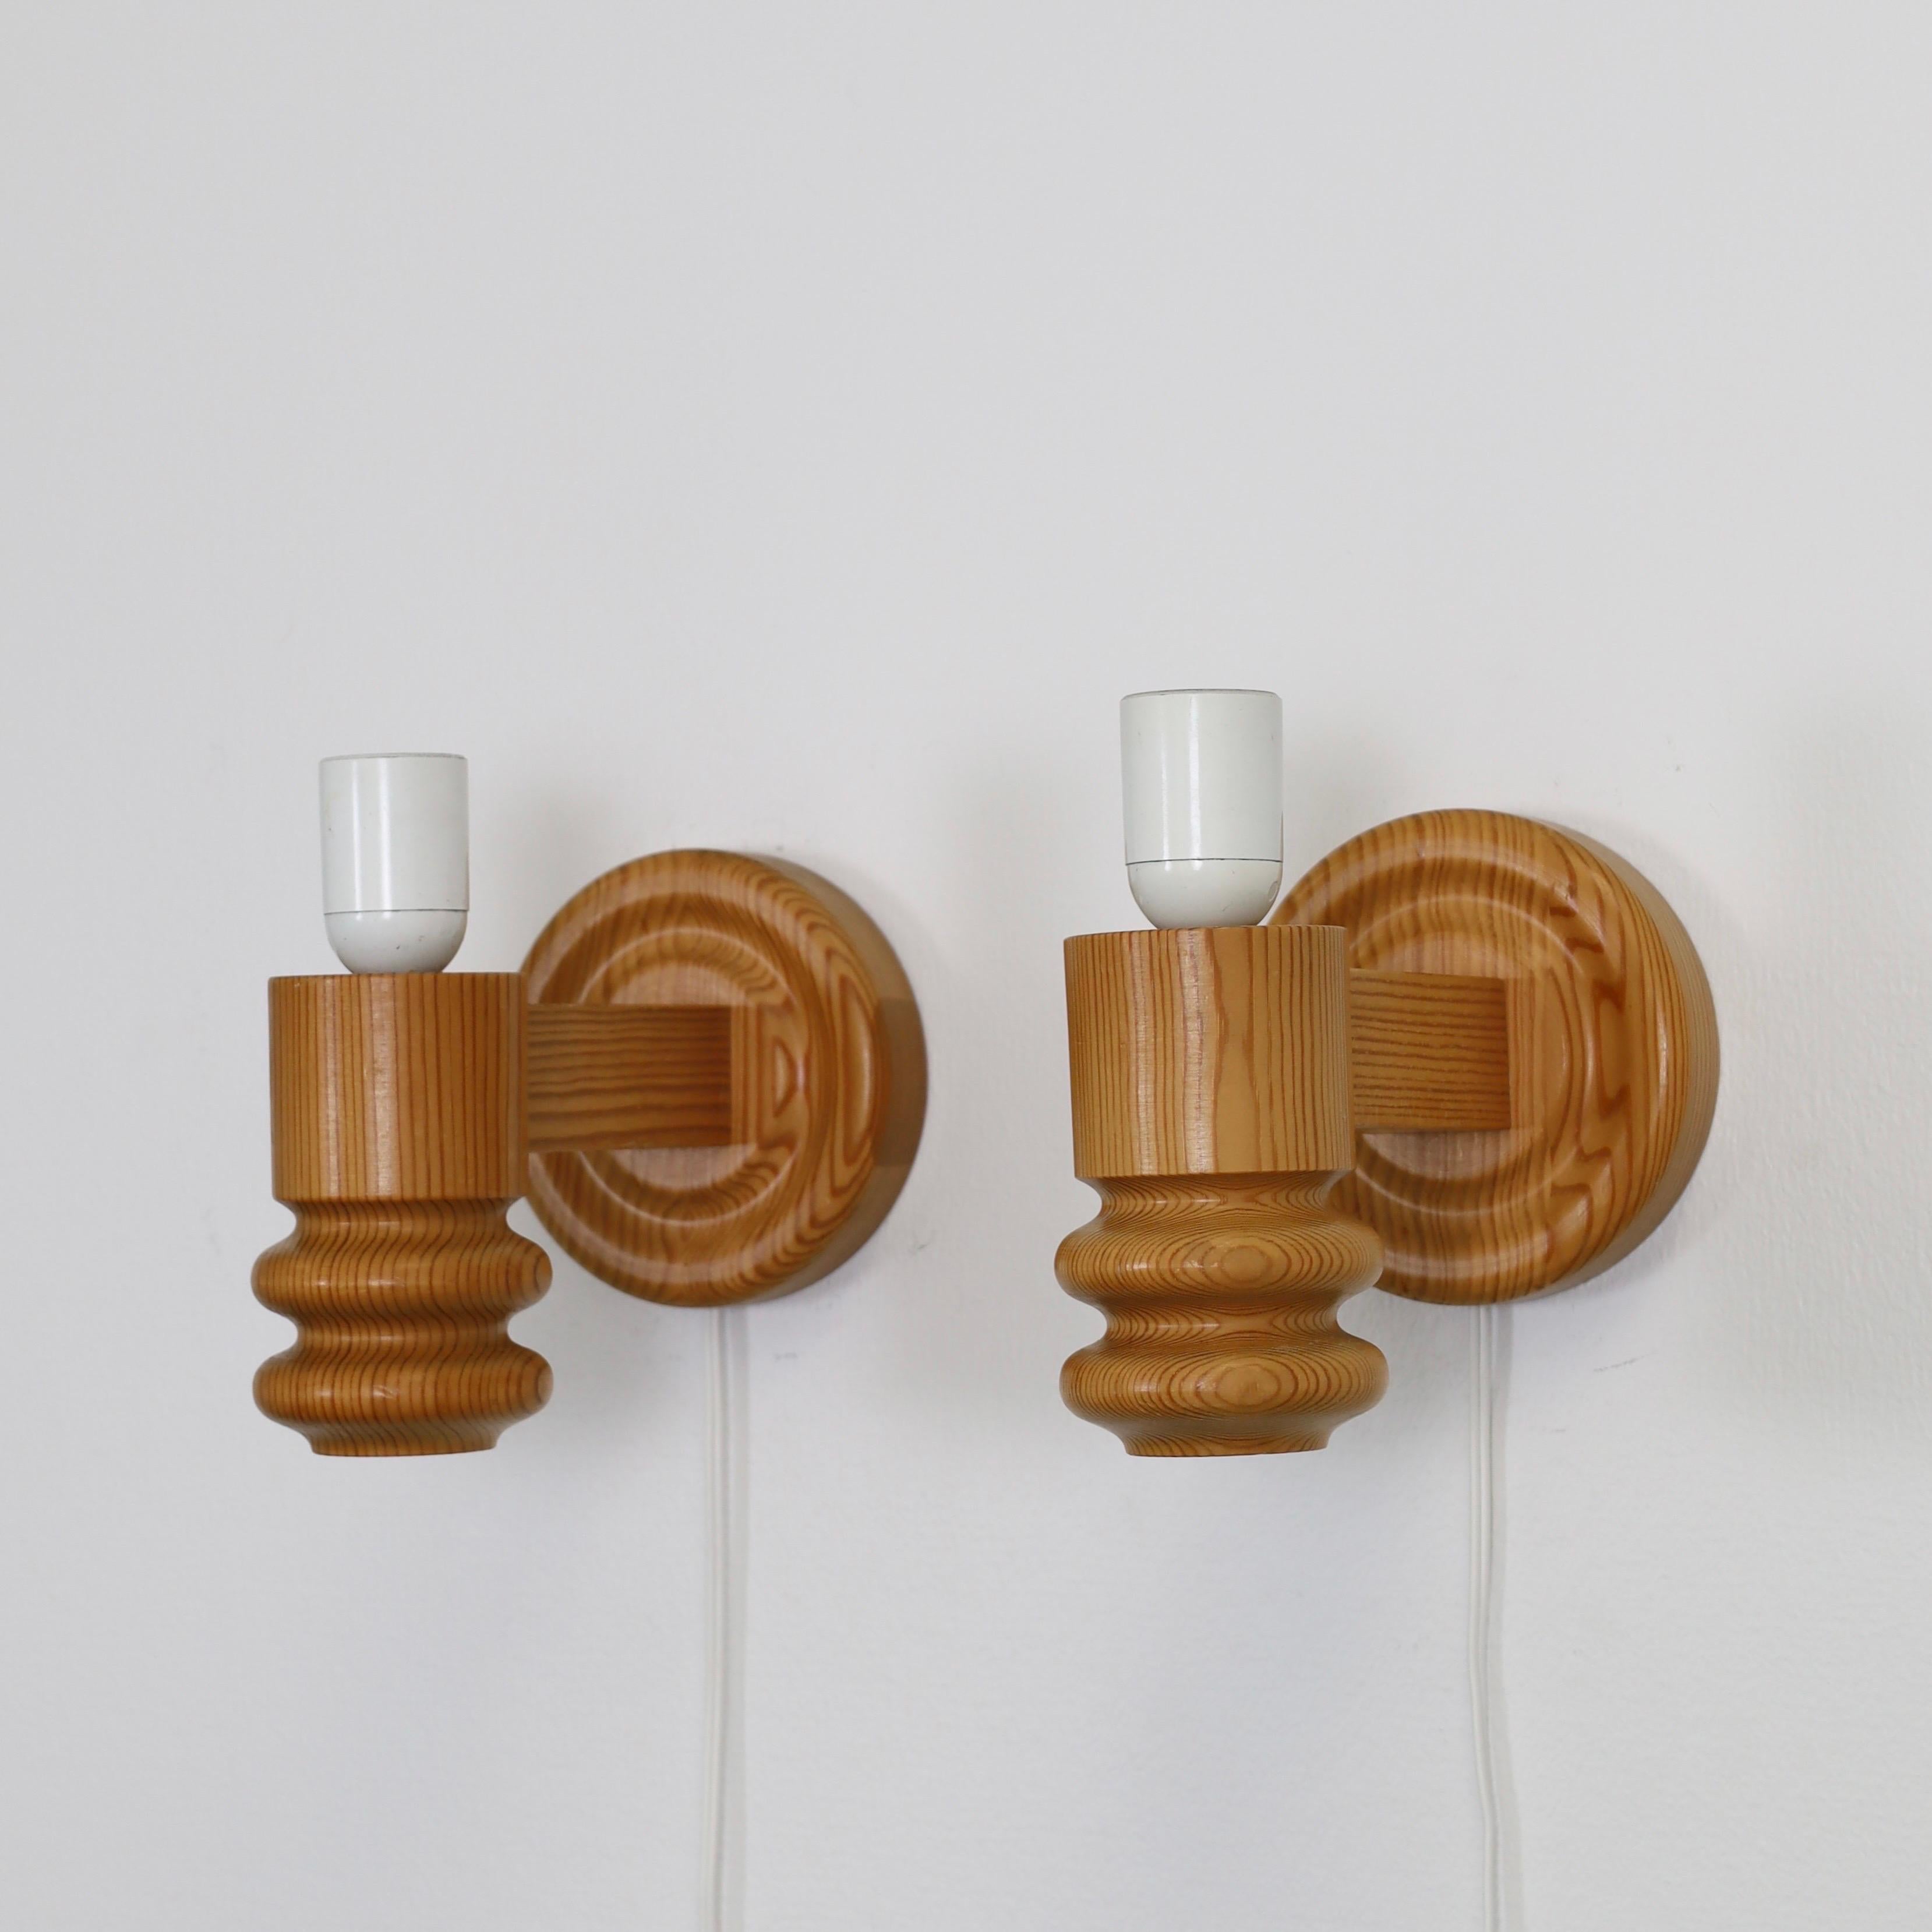 Set of Swedish Pine Wood Wall Lamps by Solbackens Svarveri, Sweden, 1970s For Sale 4